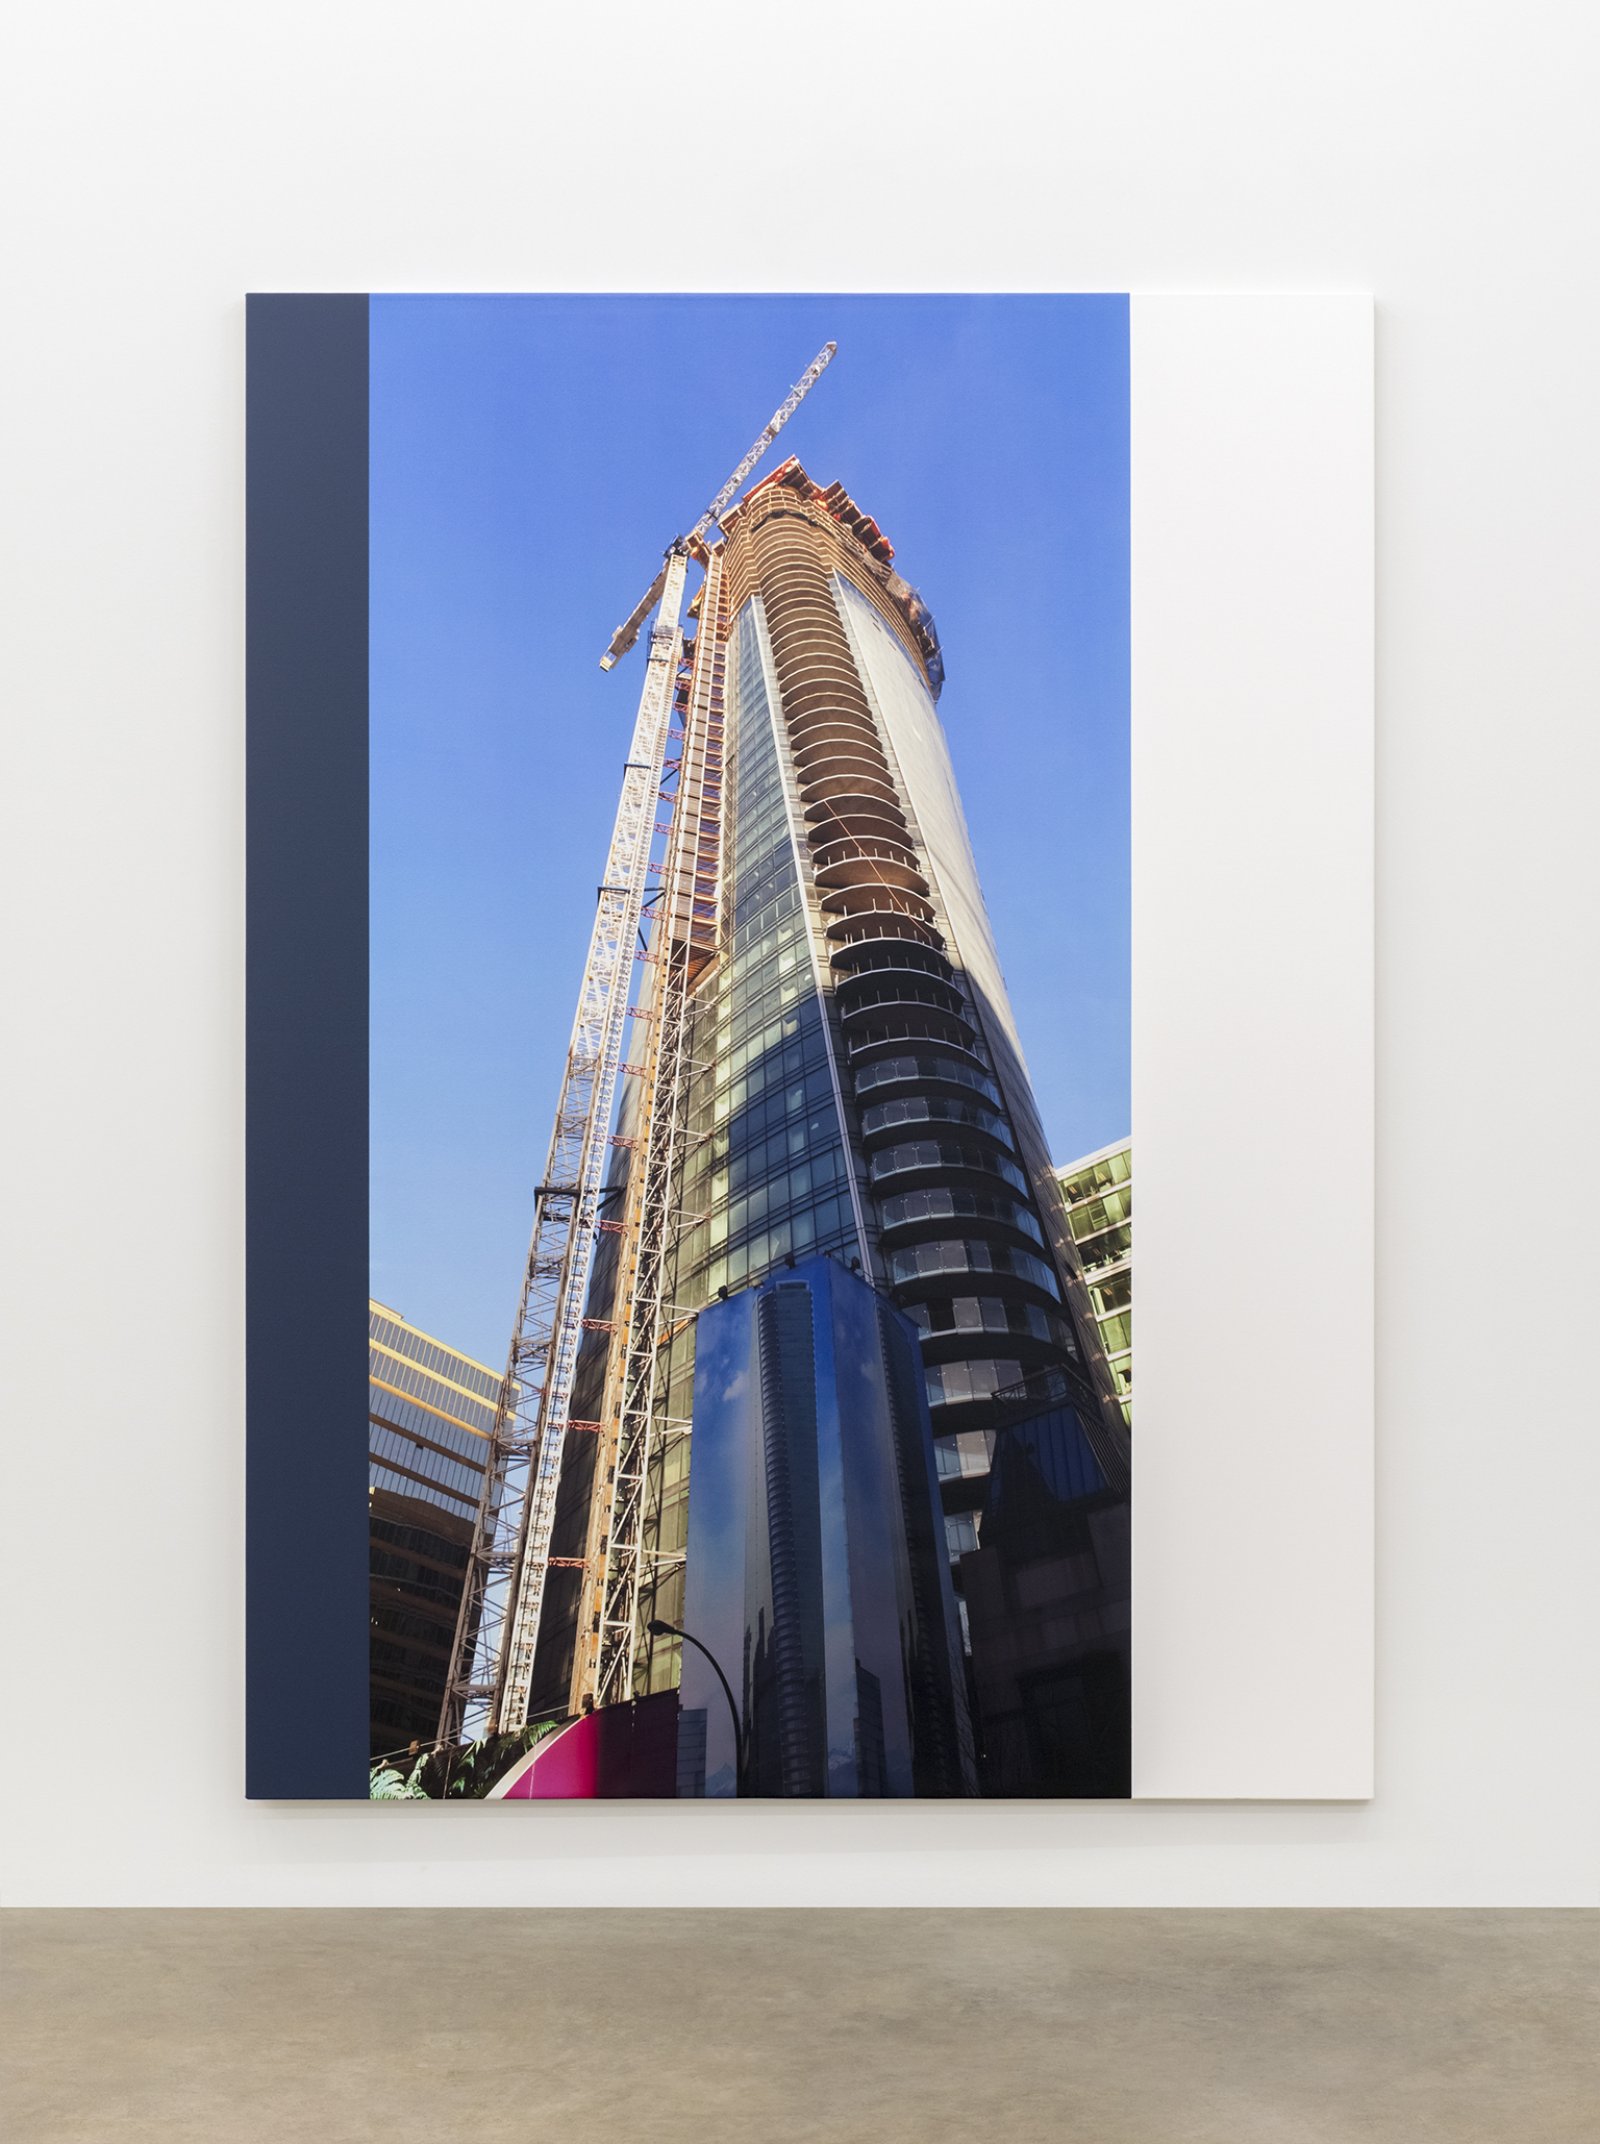 Ian Wallace, Construction Site (The Tower) I, 2015, photolaminate and acrylic on canvas, 96 x 72 in. (244 x 183 cm)